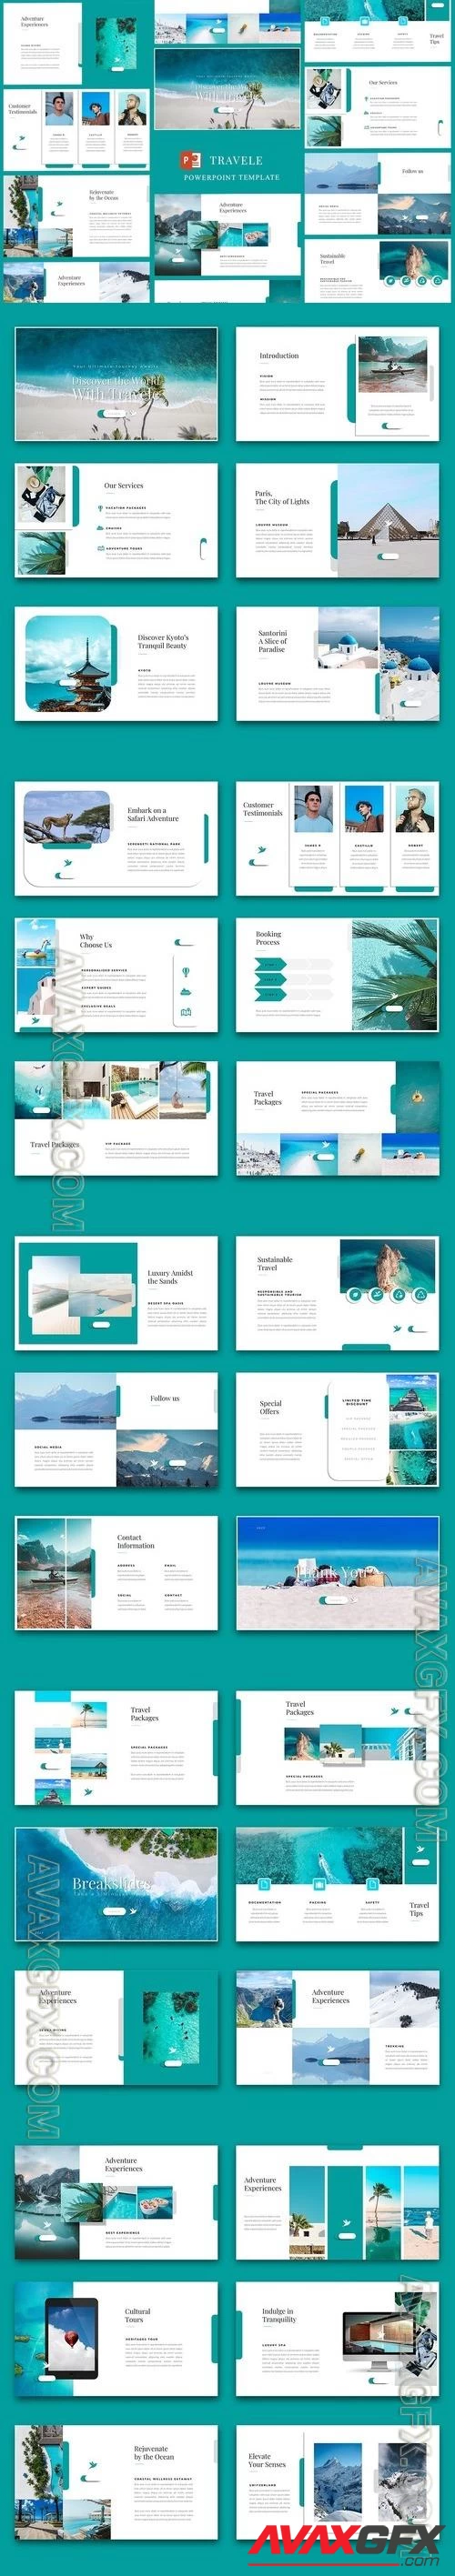 Travele - Travel agency Powerpoint Template [PPTX]